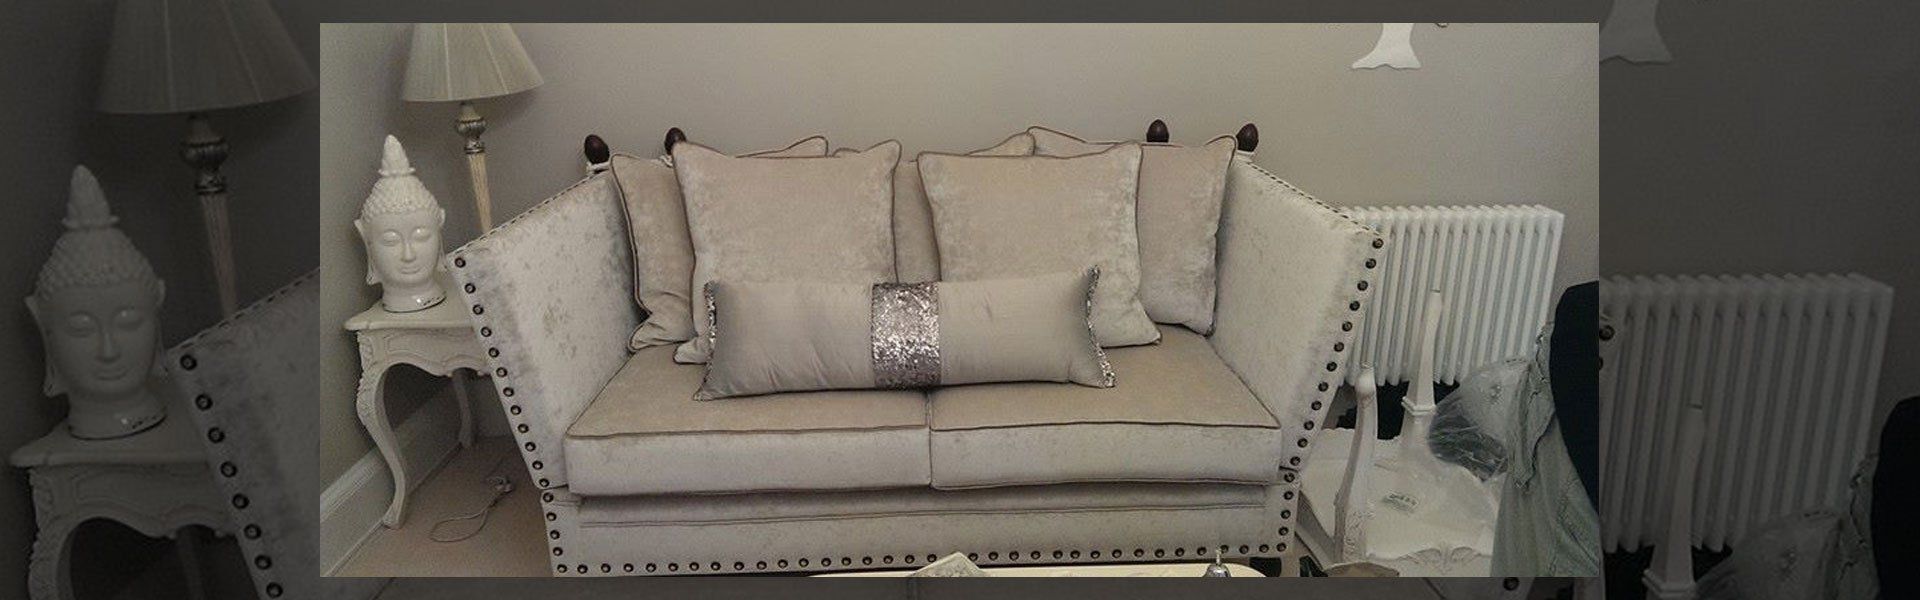 We can make your furniture look as good as new with our re-upholstery